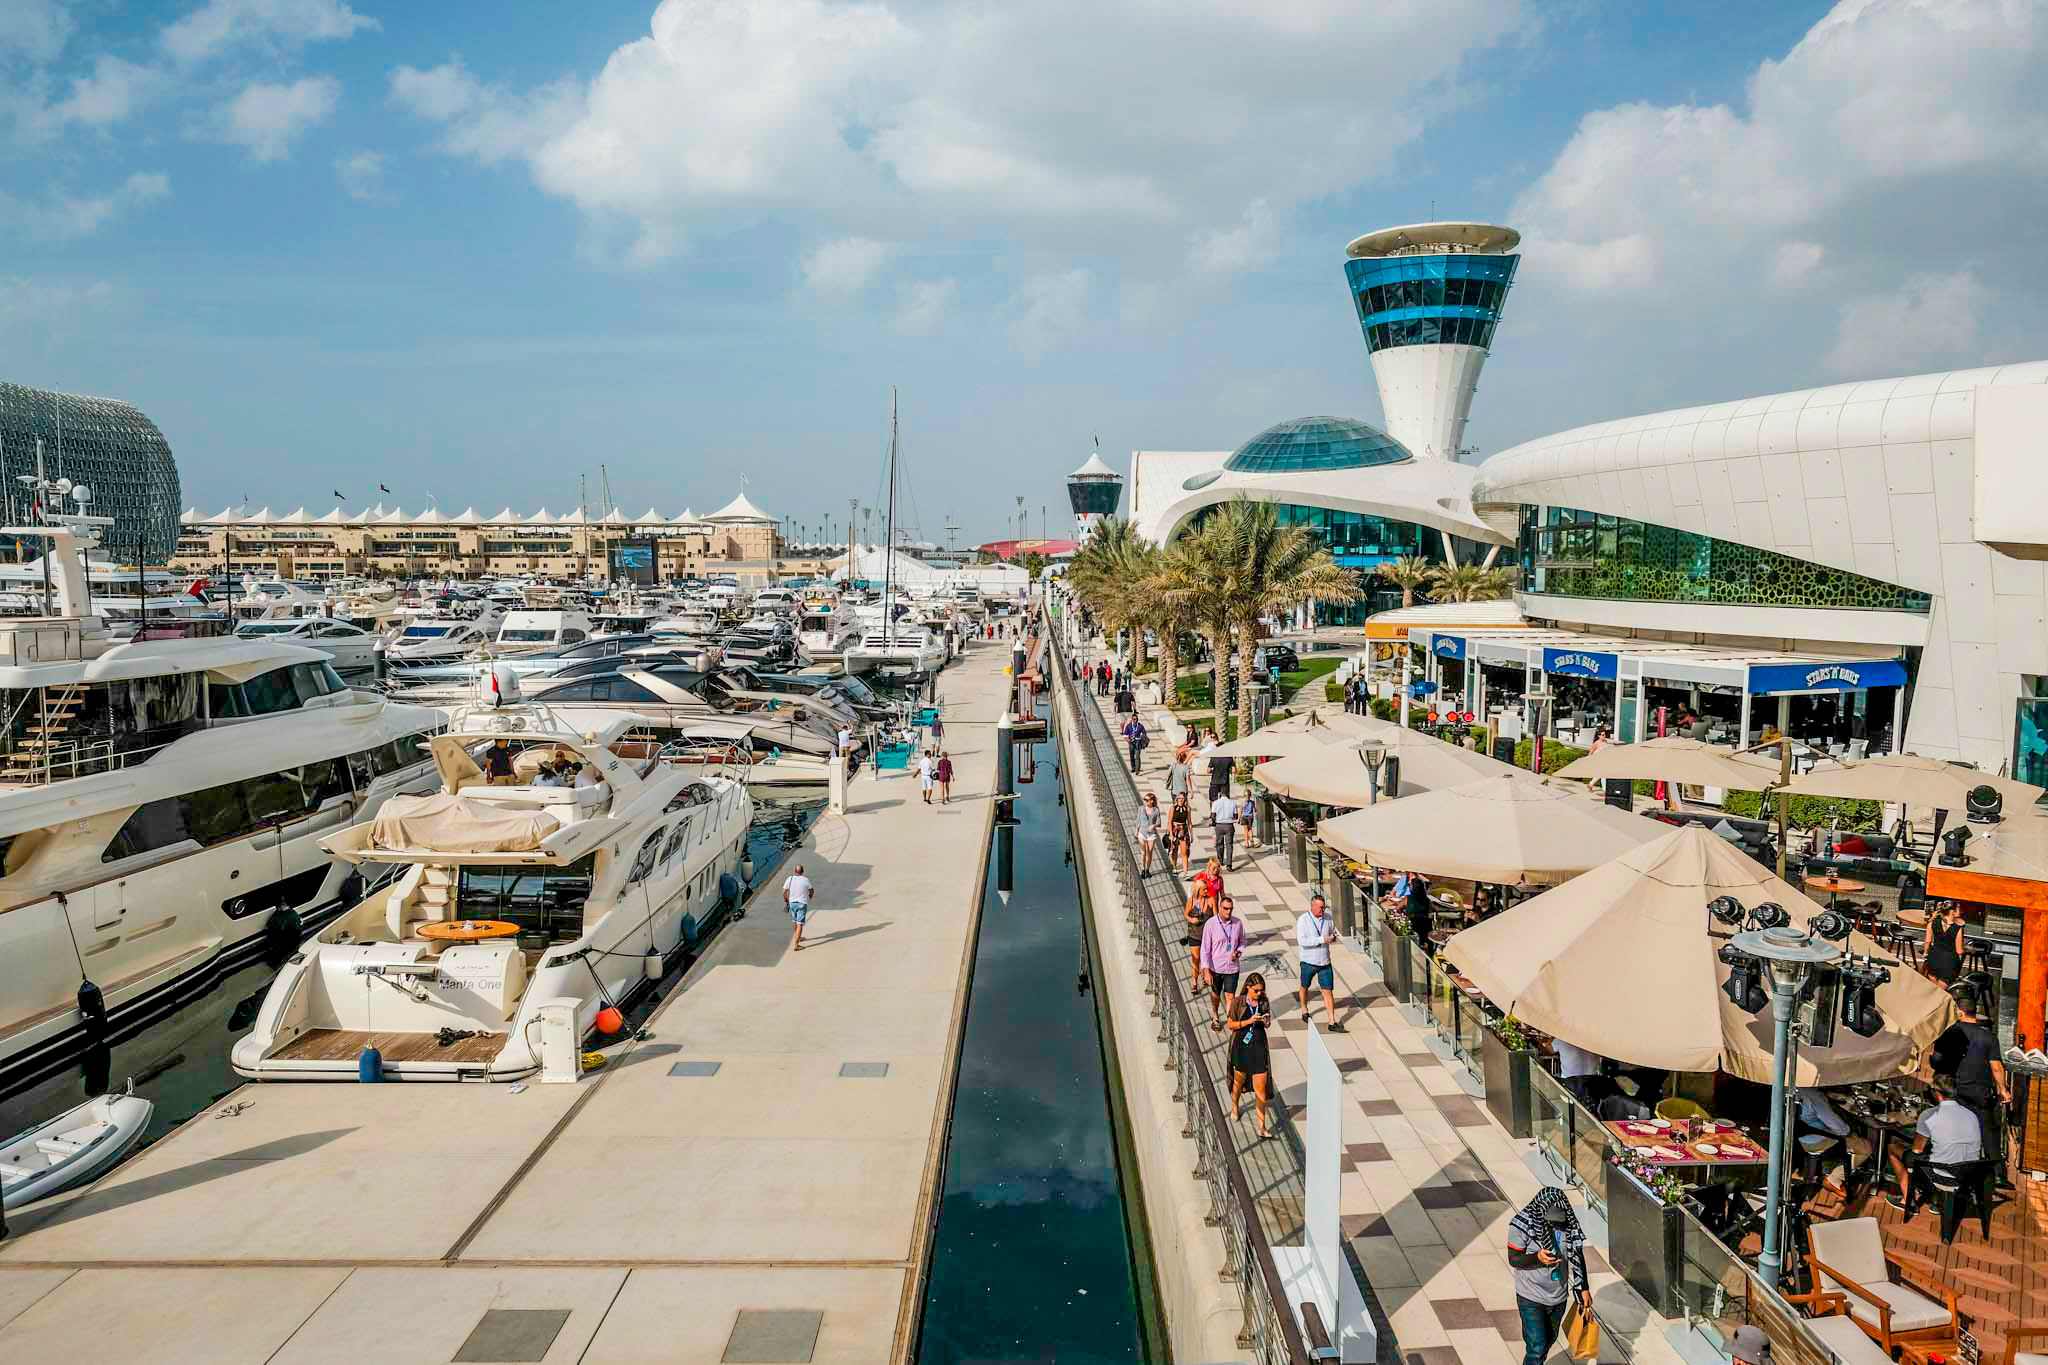 Yas Marina Is Set To Be The Heart Of All Off-Track Entertainment During The Formula 1™ Etihad Airways Abu Dhabi Grand Prix 2022